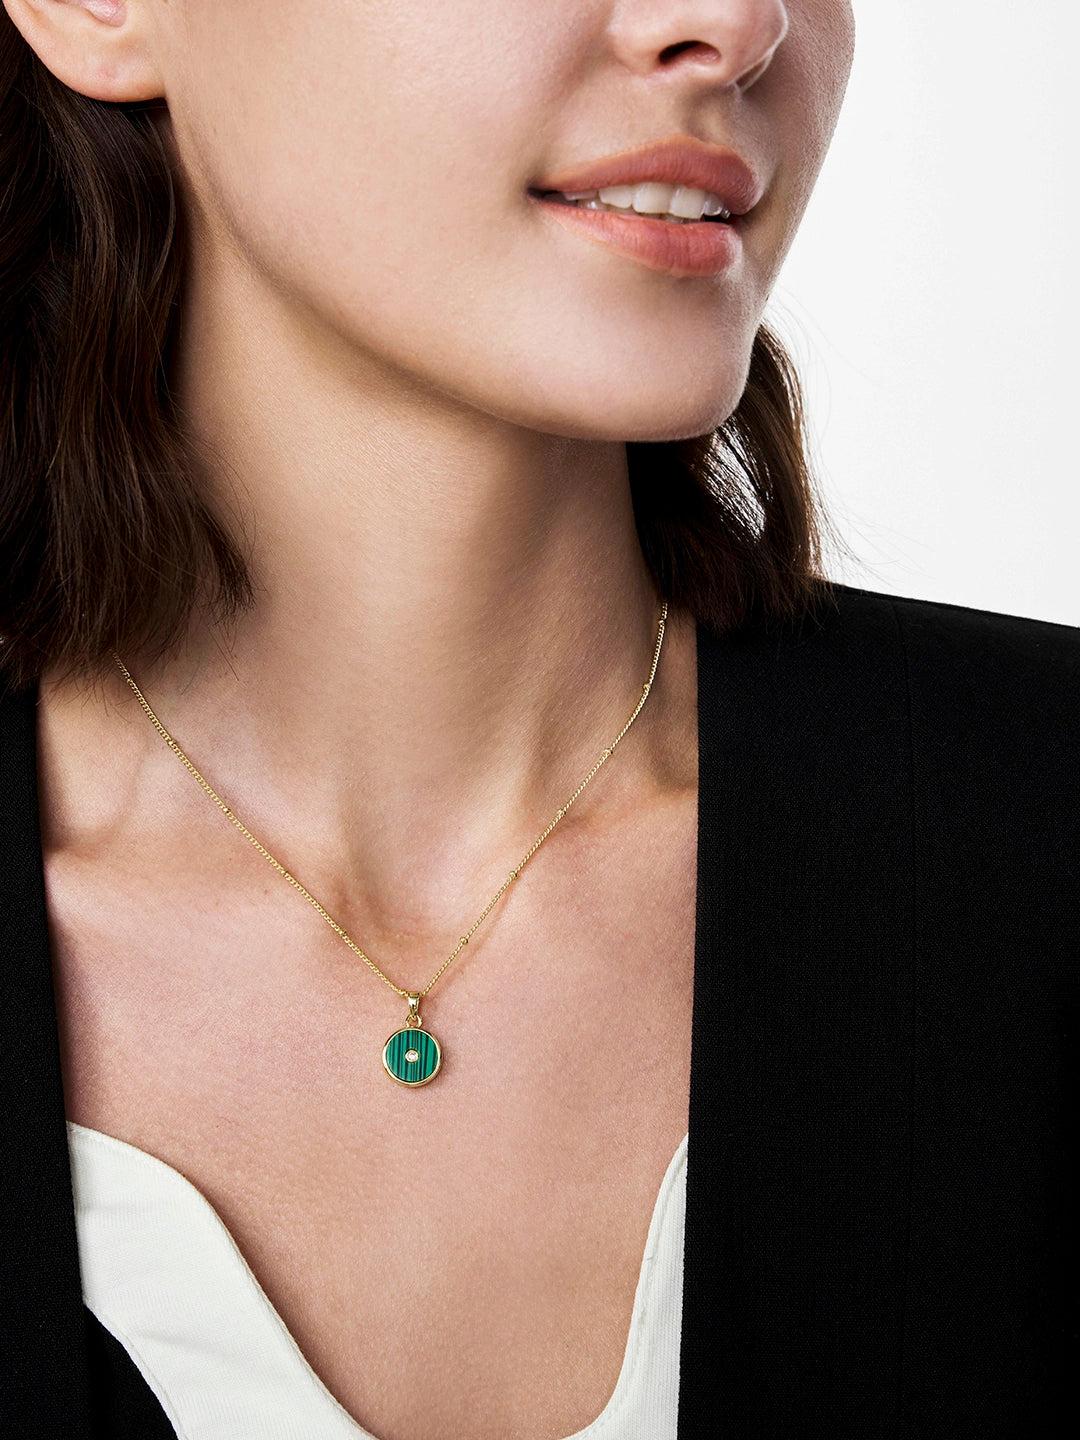 Classical Round Malachite Pendant Necklace - OOTDY